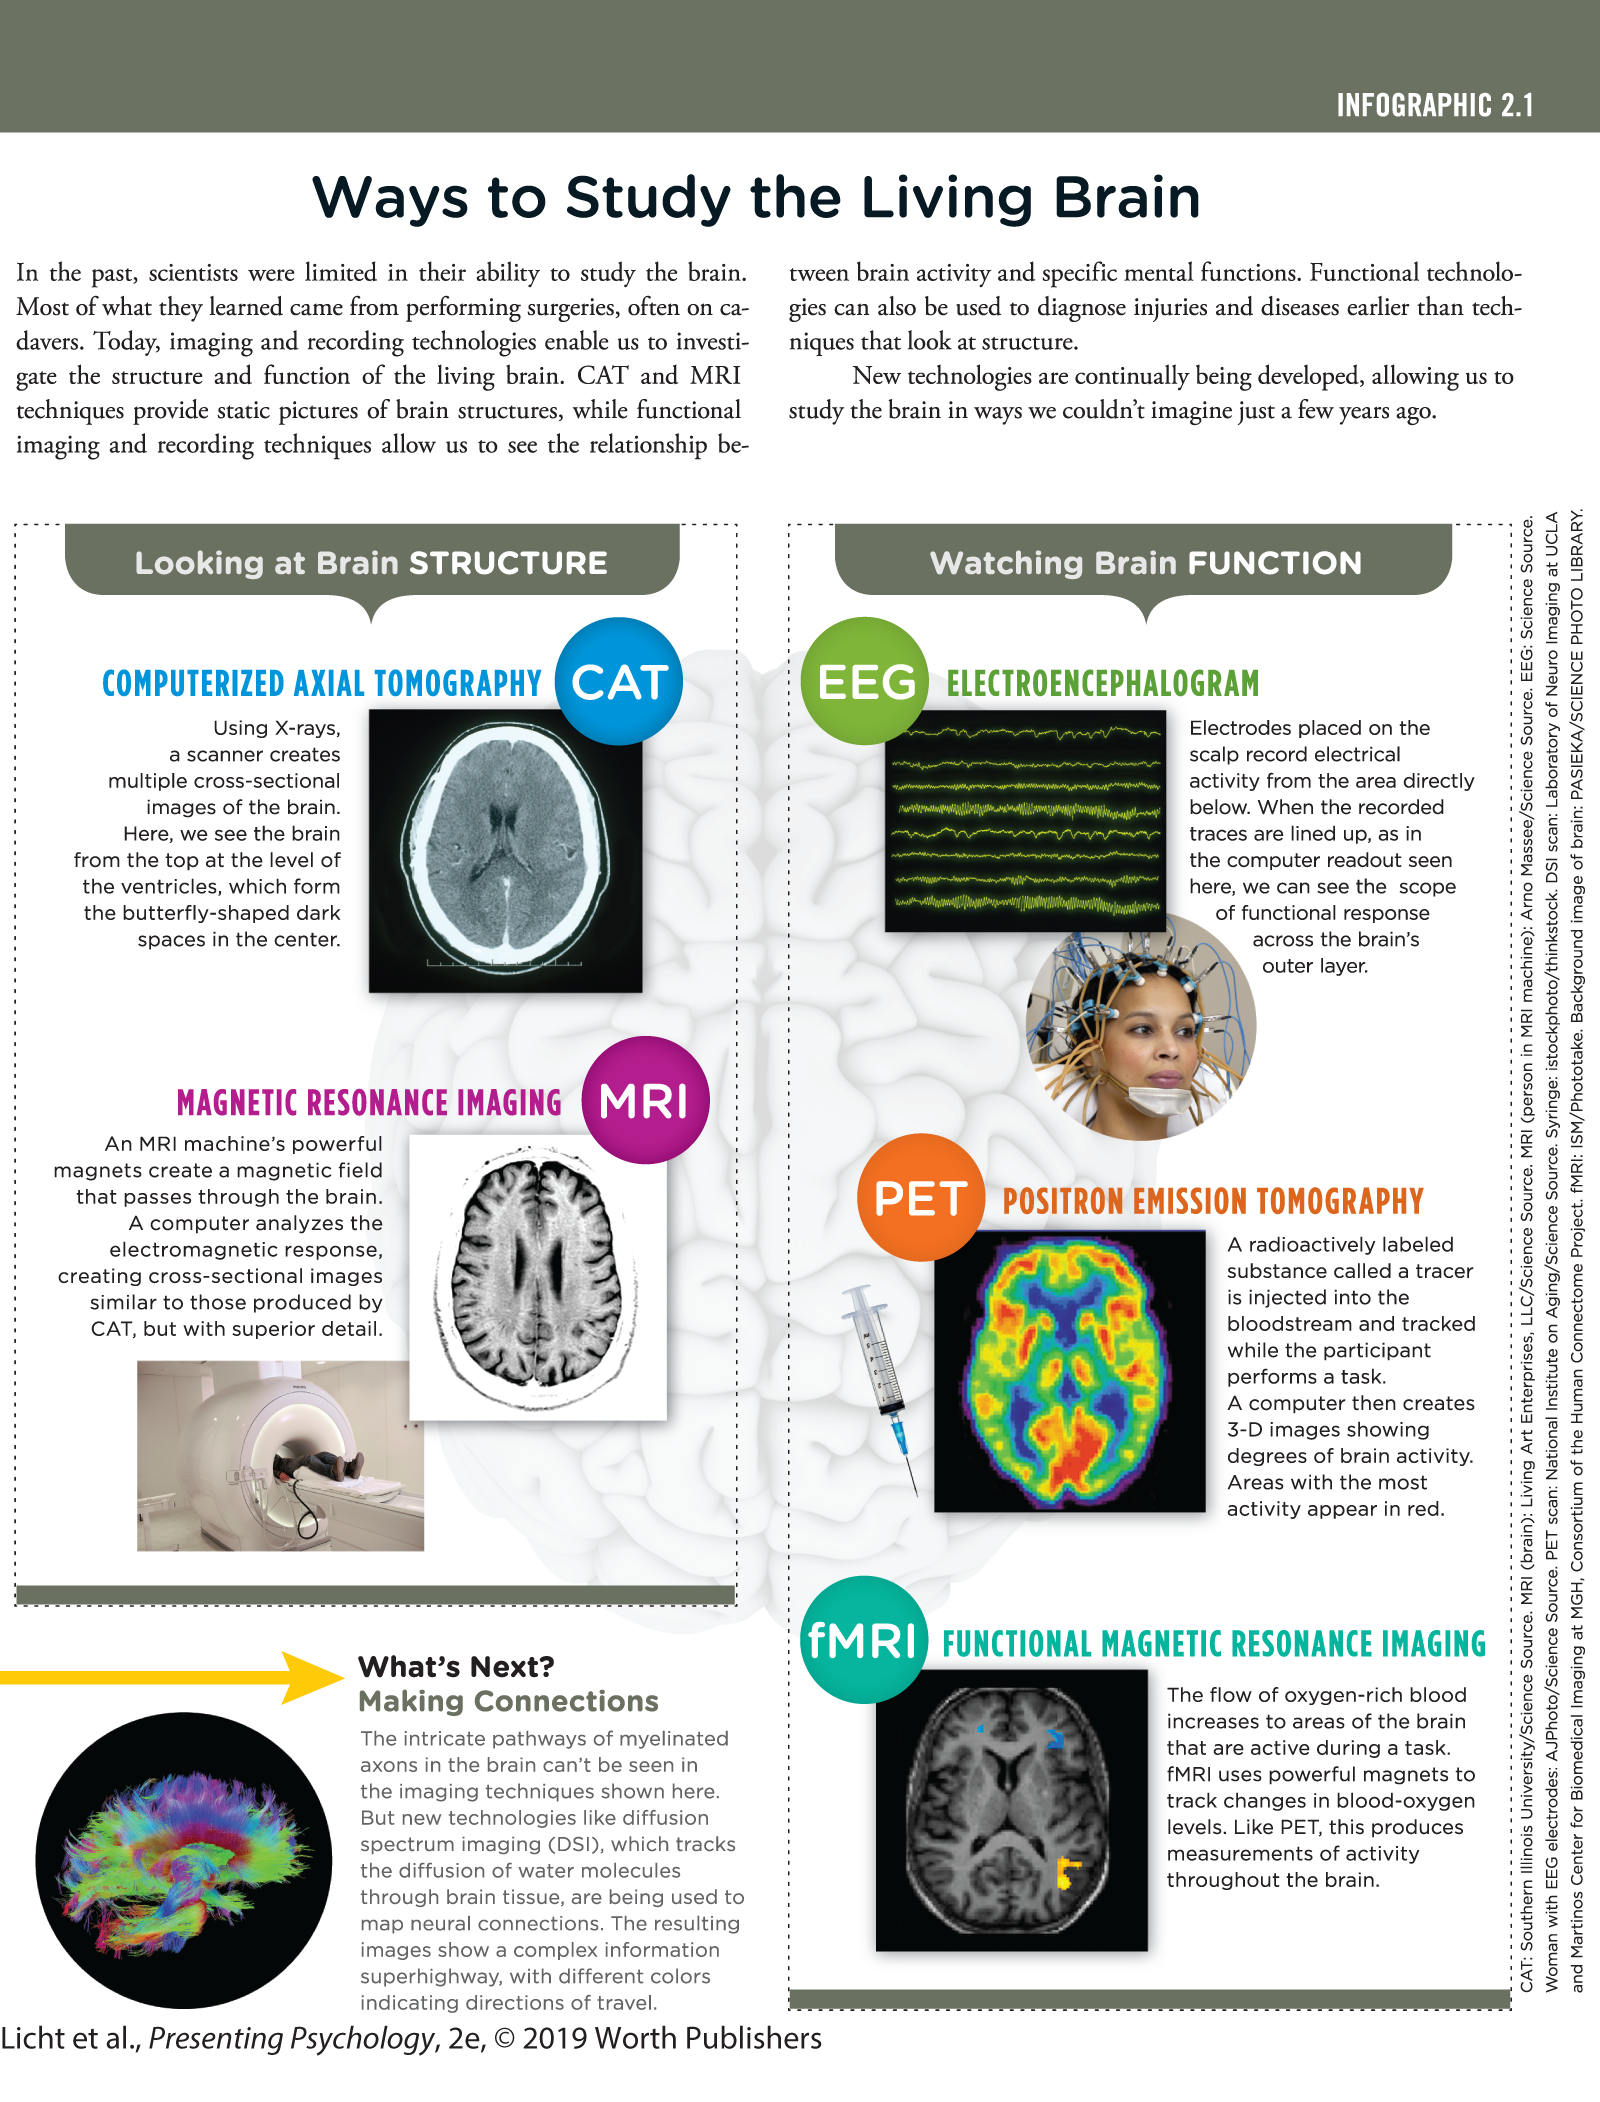 An infographic titled, Ways to Study the Living Brain, explains the various divisions in brain structure and brain functions. You can read full description from the link below